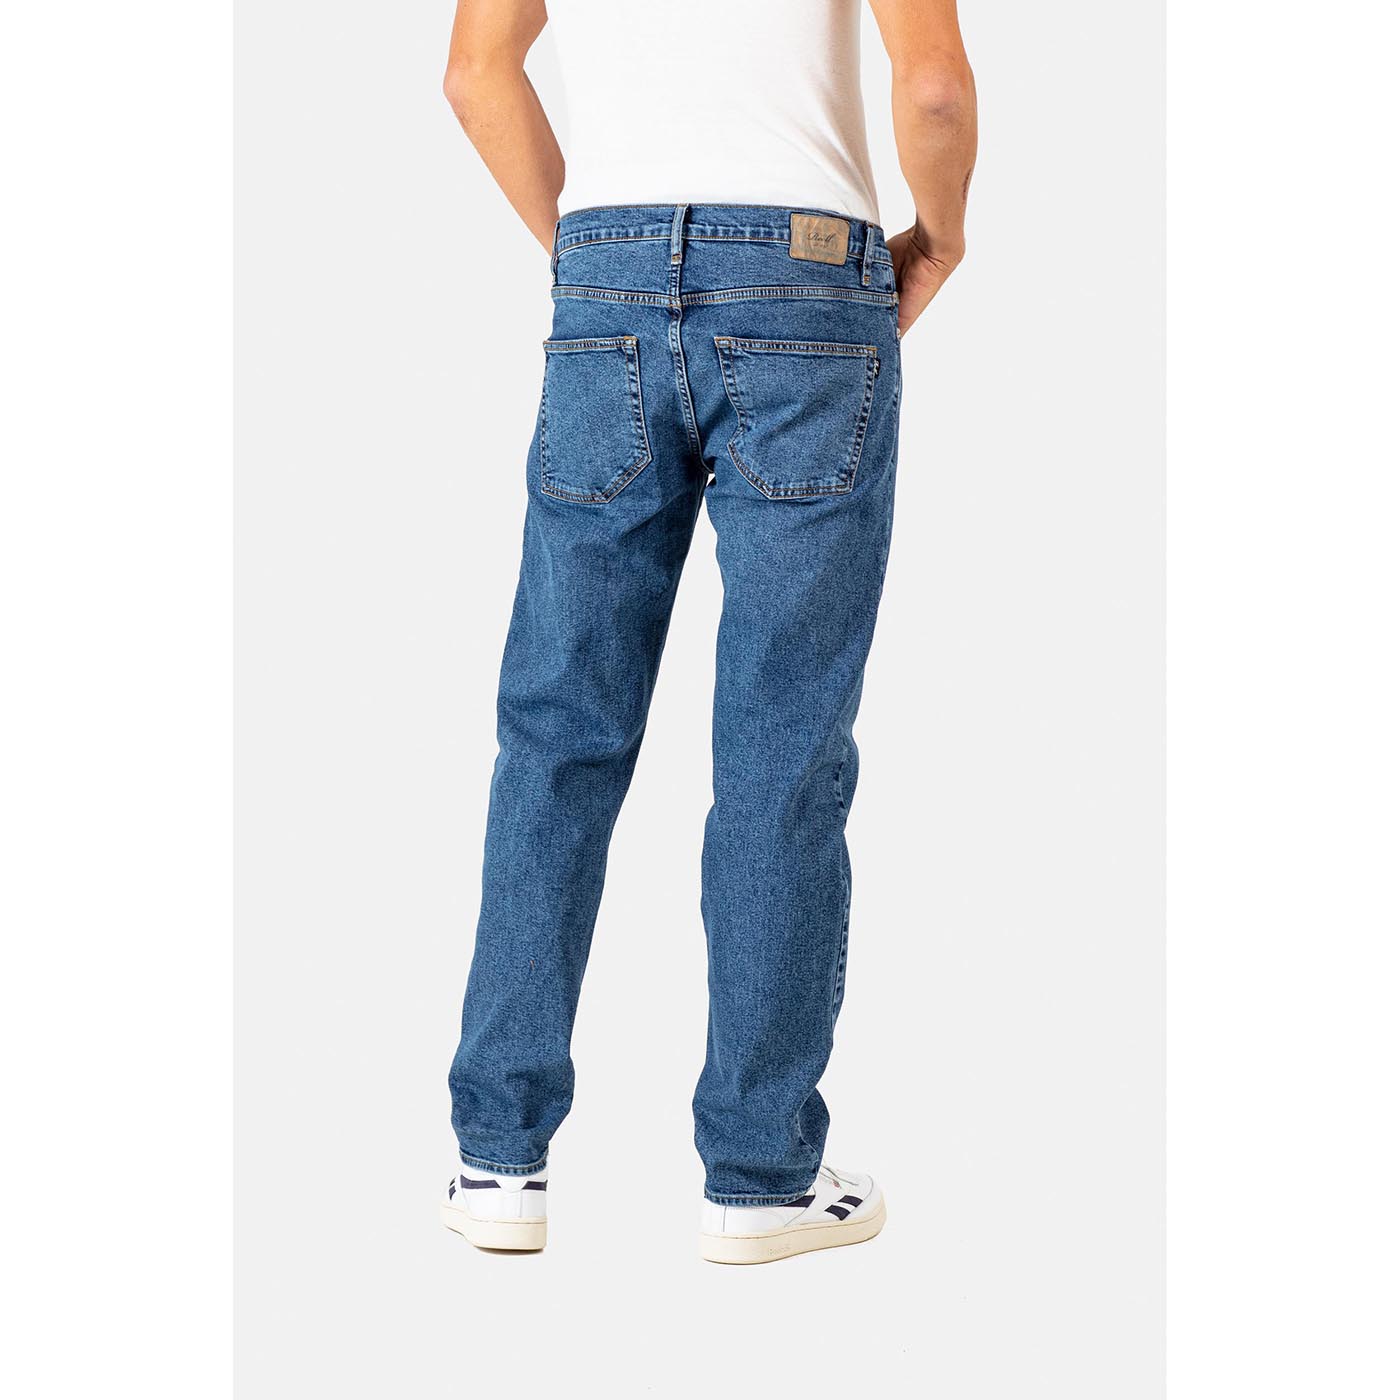 Reell Jeans Barfly Straight Fit Jeans Retro Mid Blue